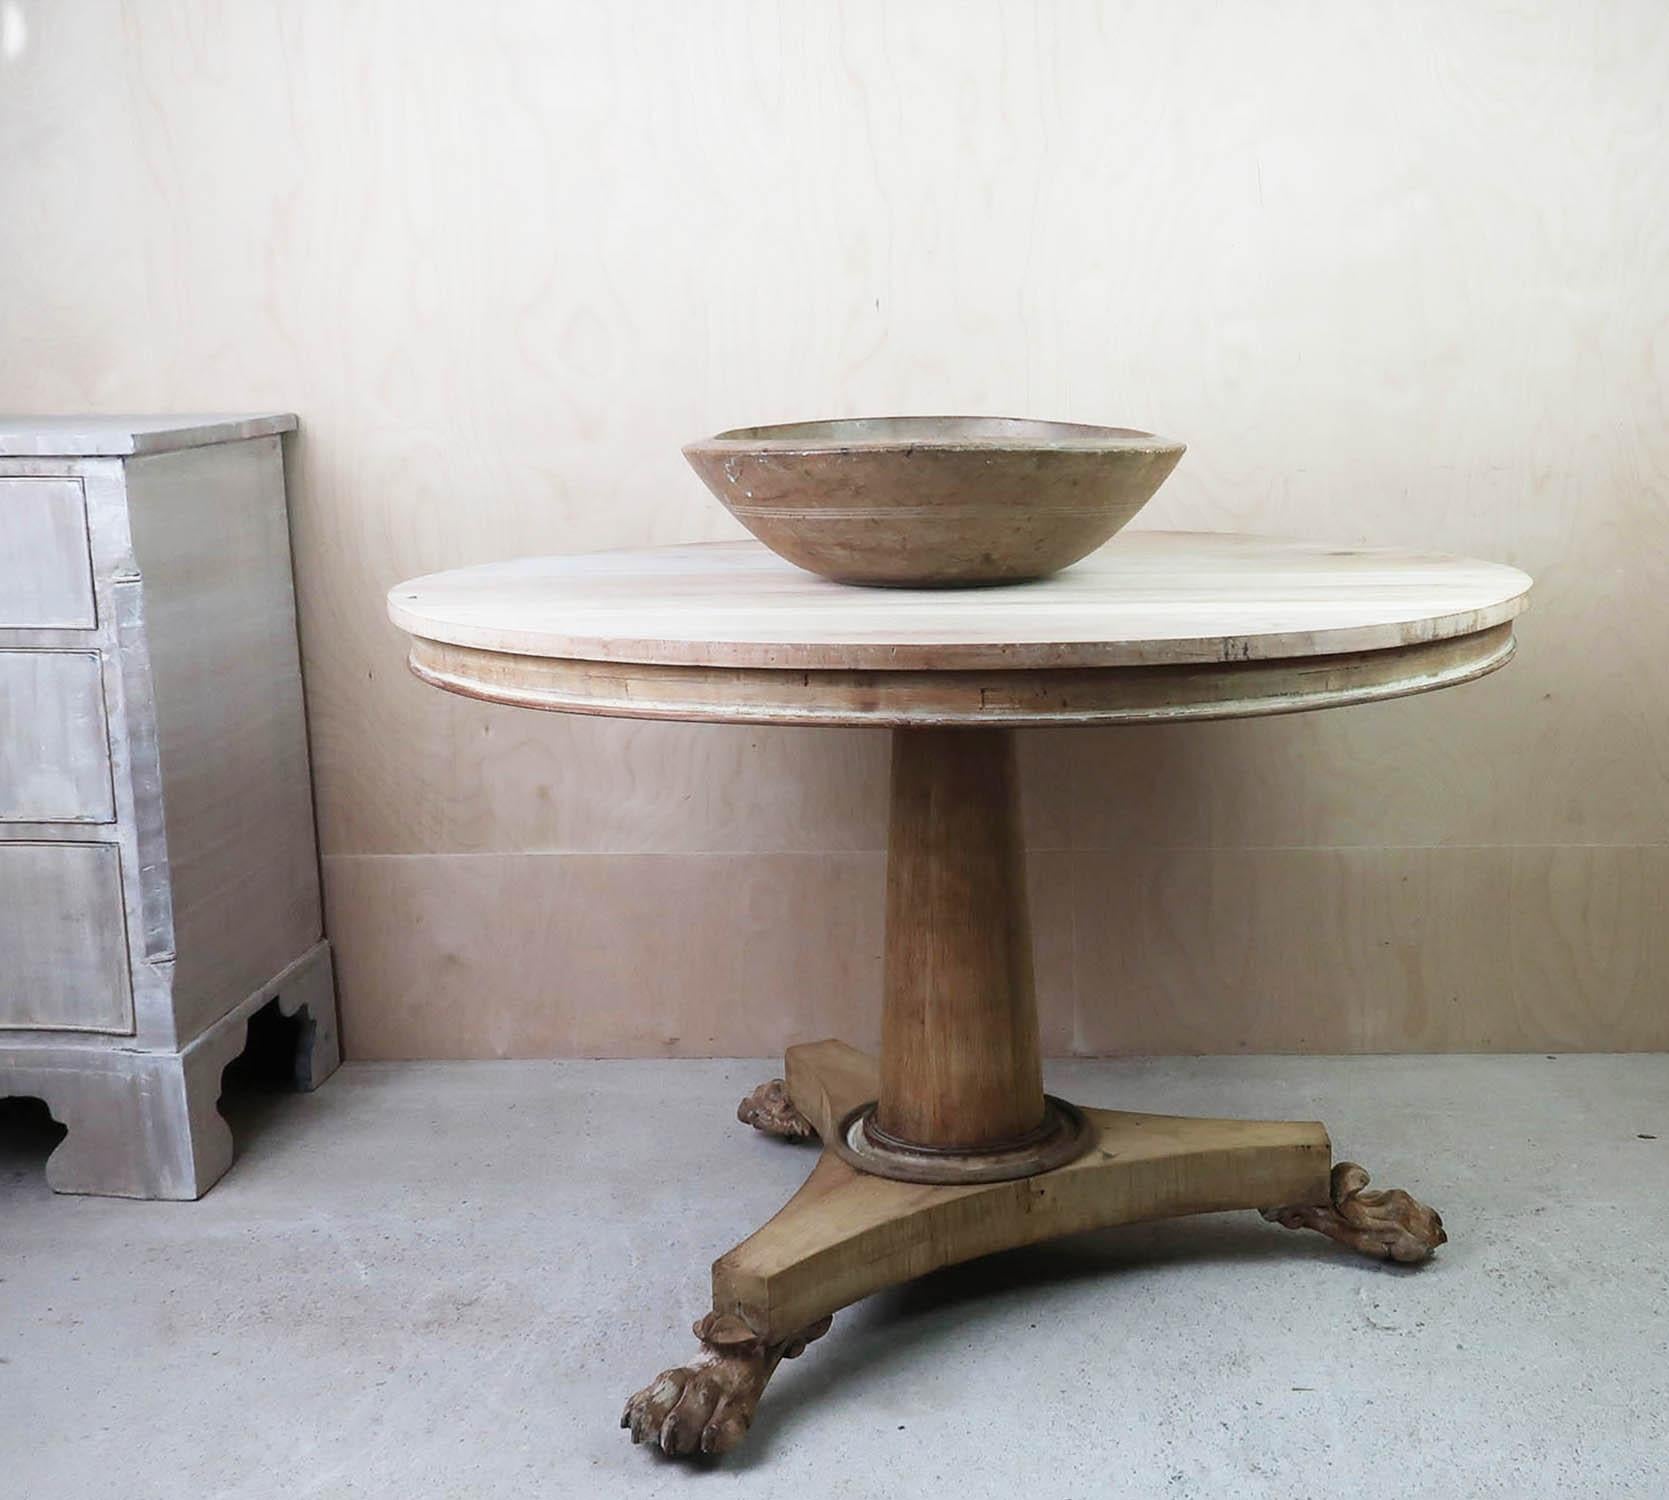 Fabulous small round table. Made from bleached tropical hardwood and pine

Nicely figured top

Amazing carved lion paw feet

I particularly like its simplicity.

I have chosen not to lacquer or wax the table.

2 original casters. One